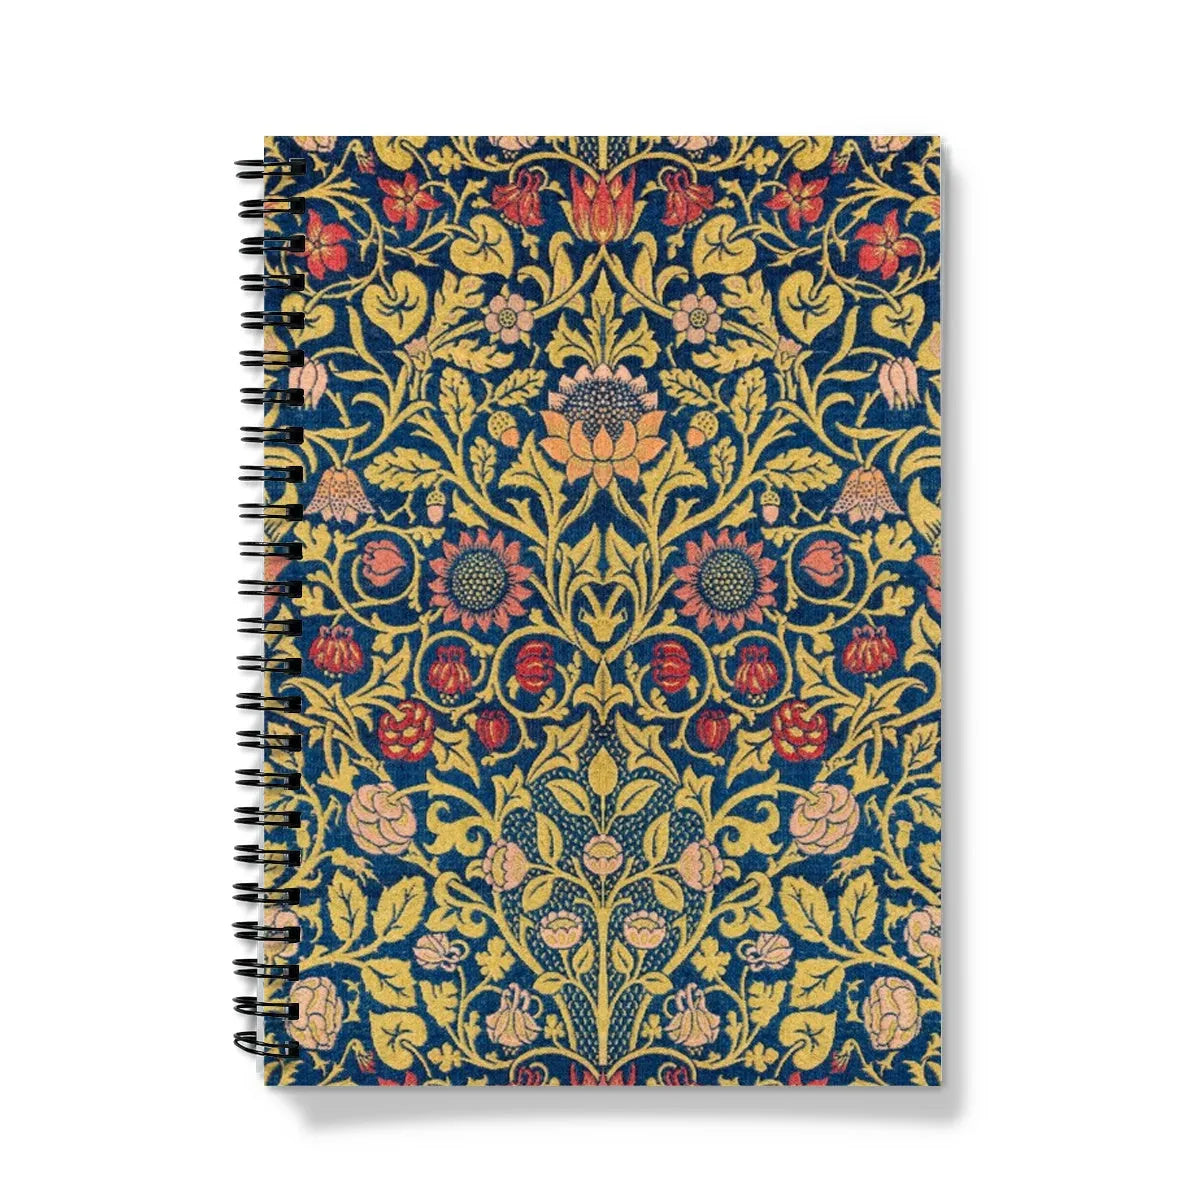 Violet And Columbine - William Morris Notebook - A5 / Lined - Notebooks & Notepads - Aesthetic Art